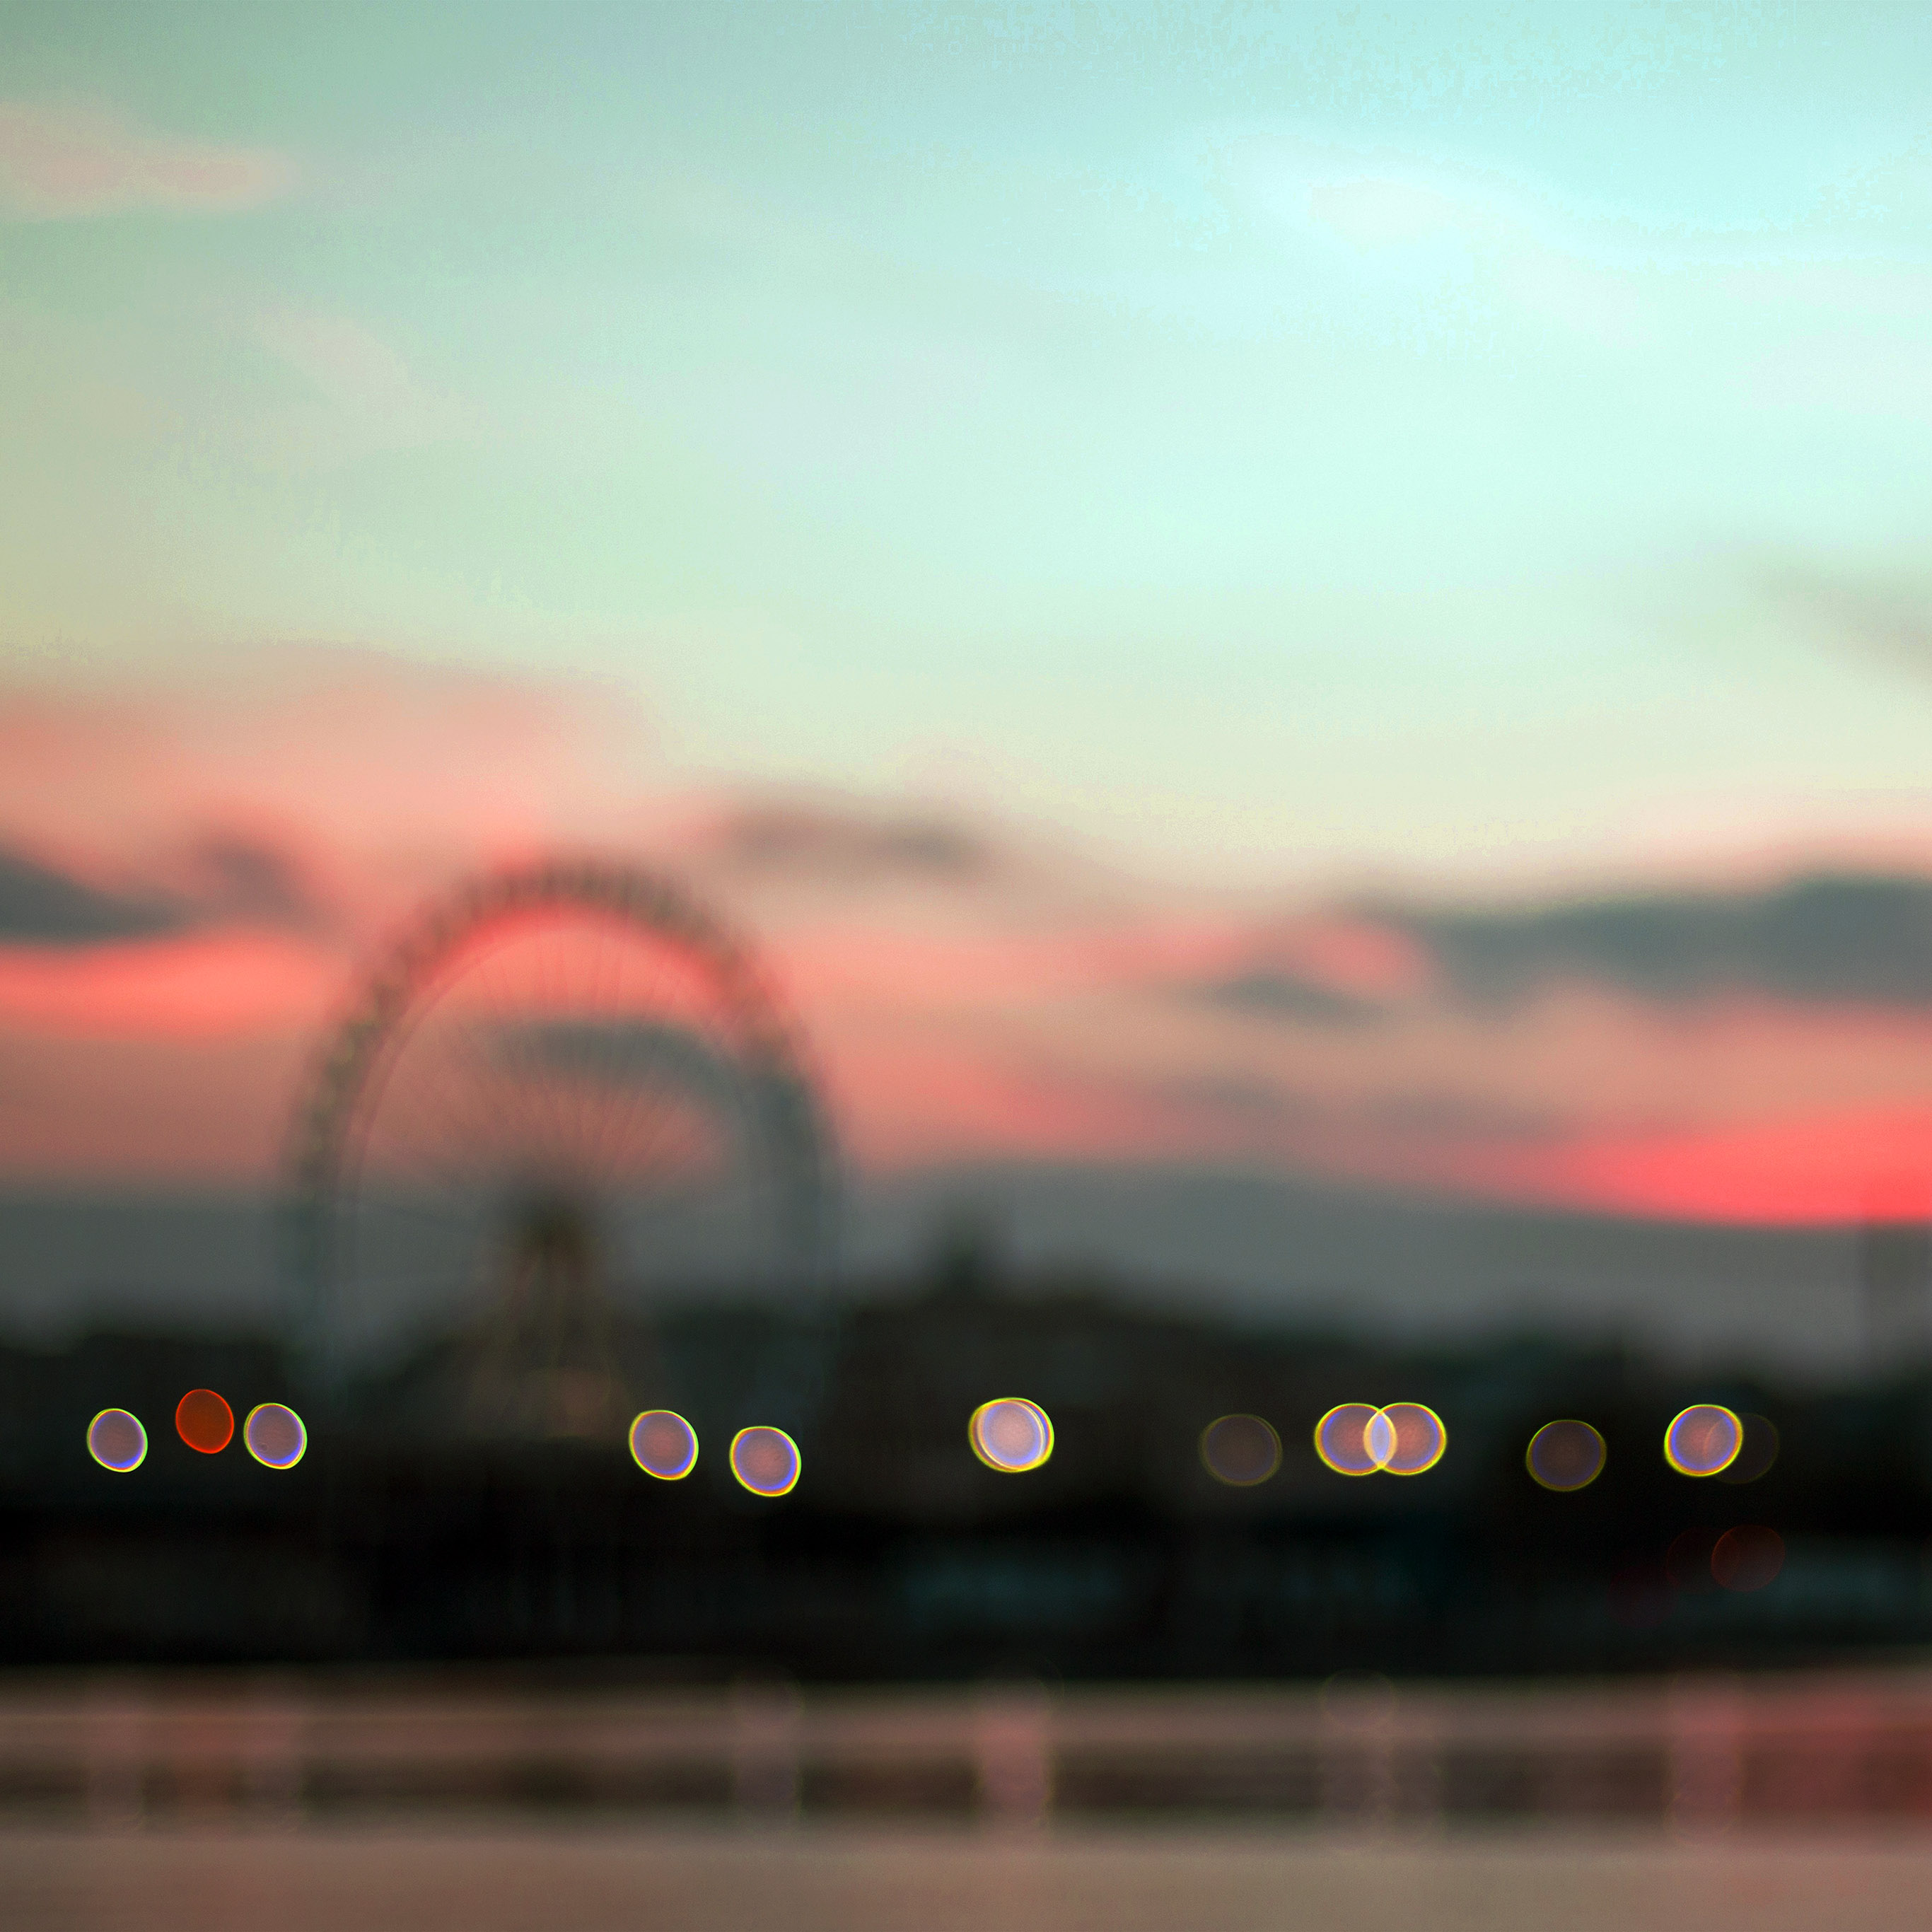 sunset wallpapers iphone ipad papers-co idownloadblog bokeh-circle-sunset-afternoon-london-red-ipad-pro